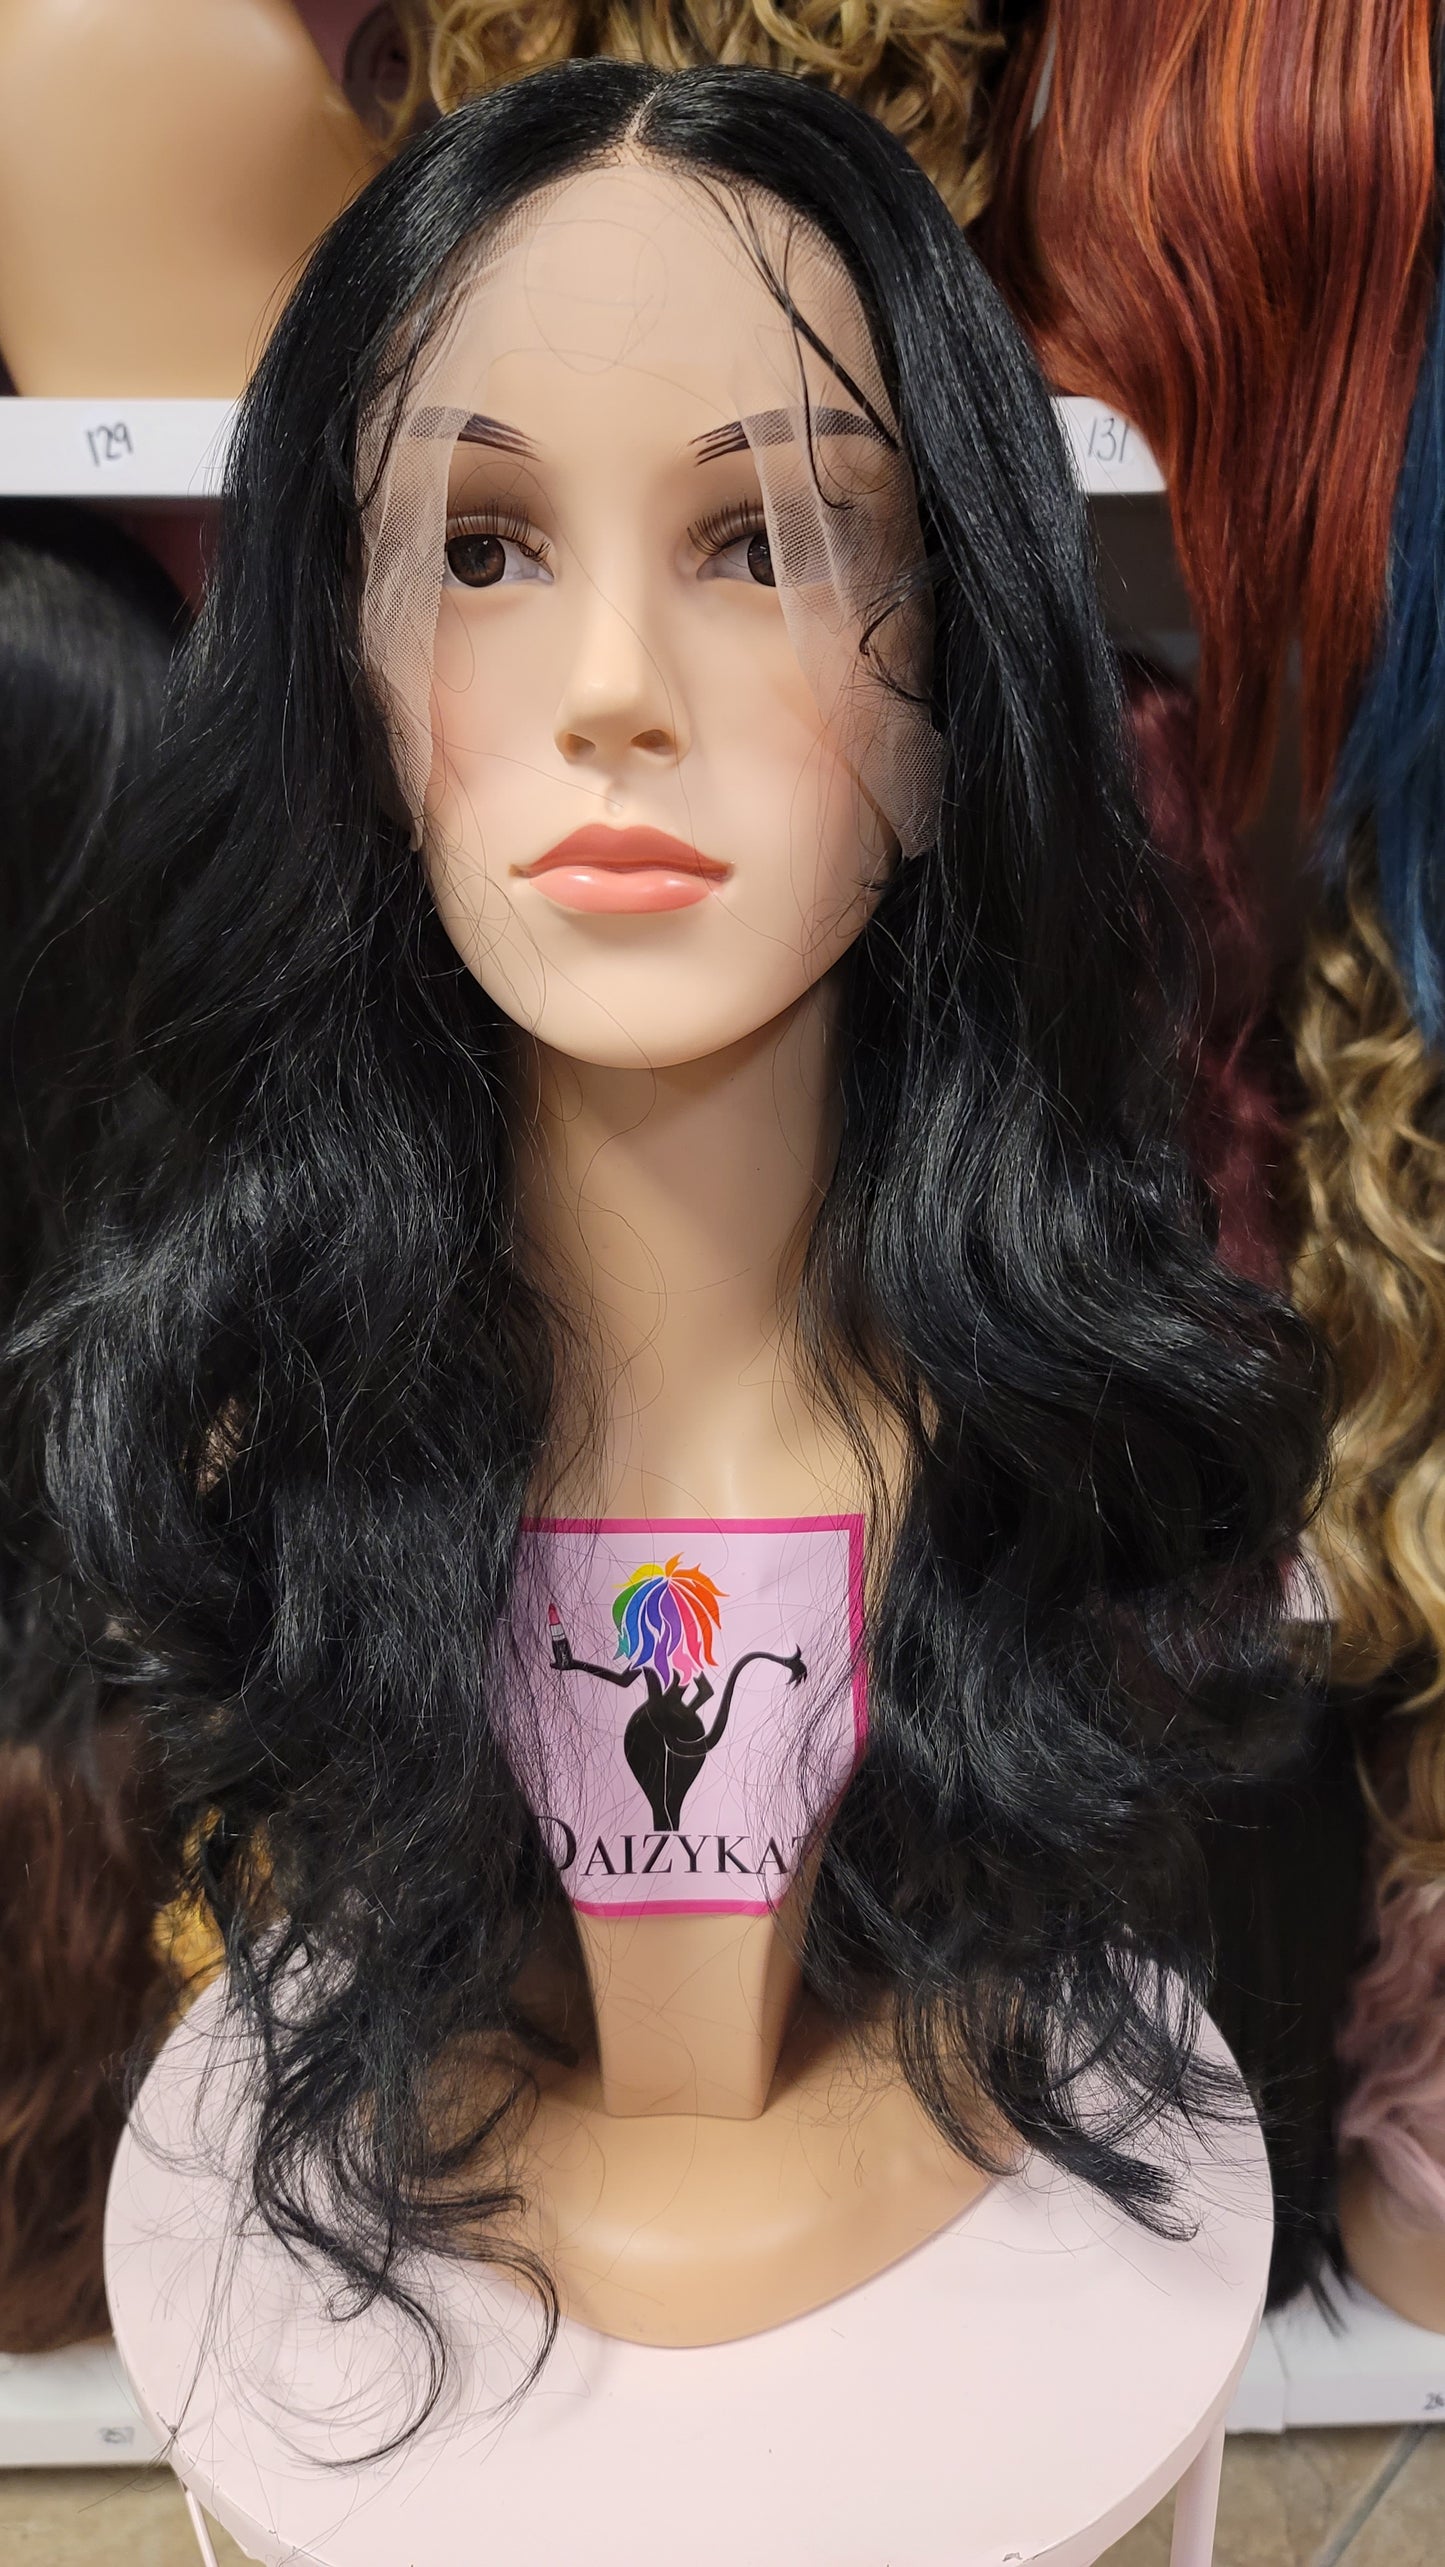 421 Katie - Middle Part Lace Front Wig - 1B - DaizyKat Cosmetics 421 Katie - Middle Part Lace Front Wig - 1B DaizyKat Cosmetics Wigs